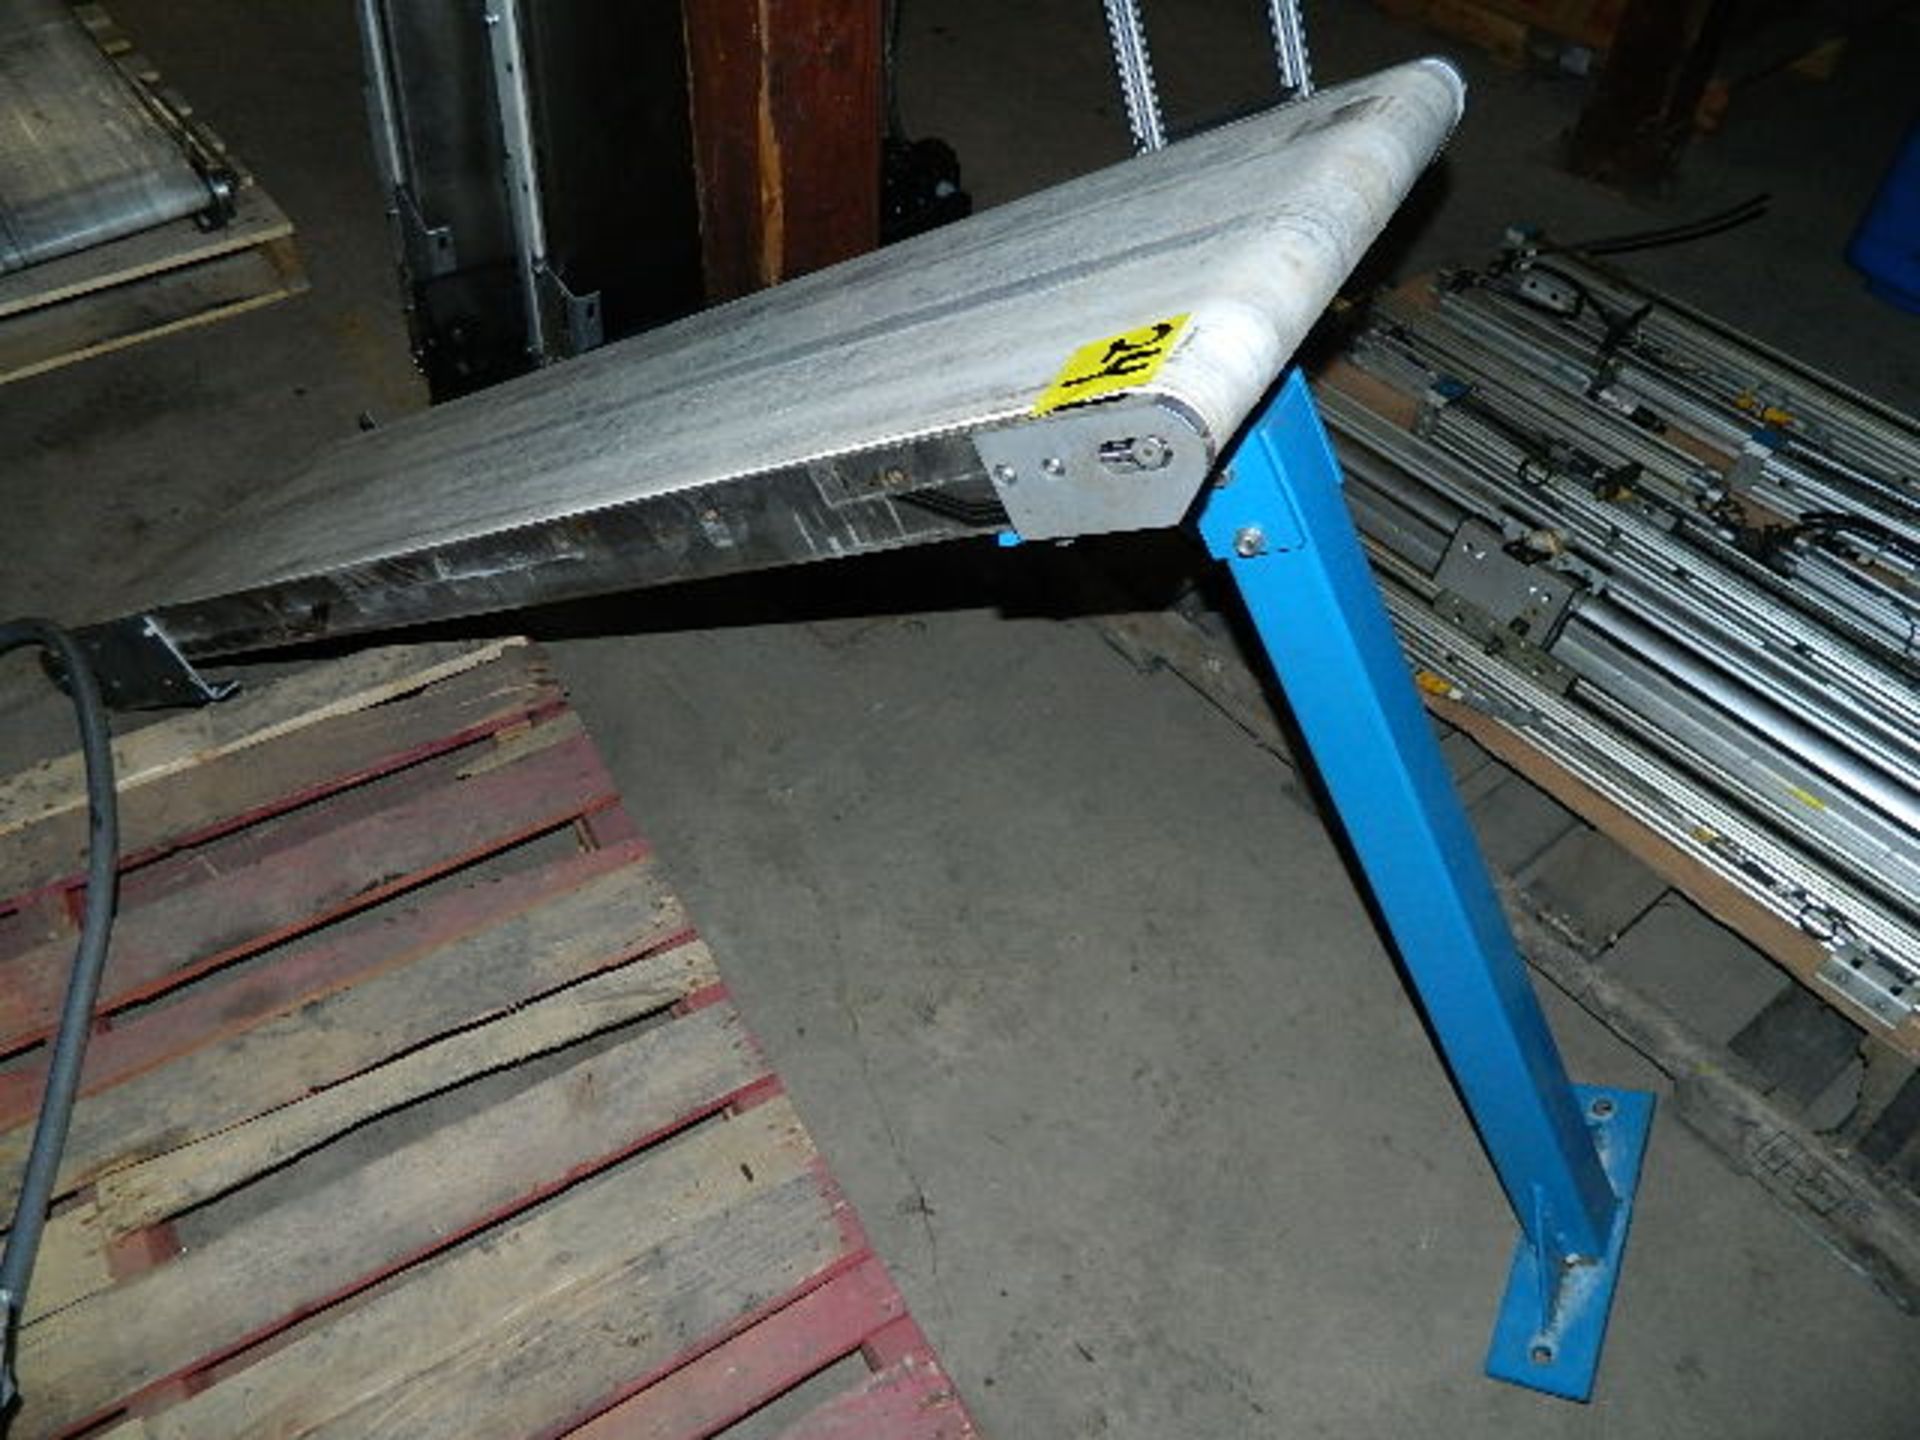 Conveyors Stainless Steel & Steel 48" to 60" Long 16" Wide, (Qty. 4 No Motors) - Image 3 of 3